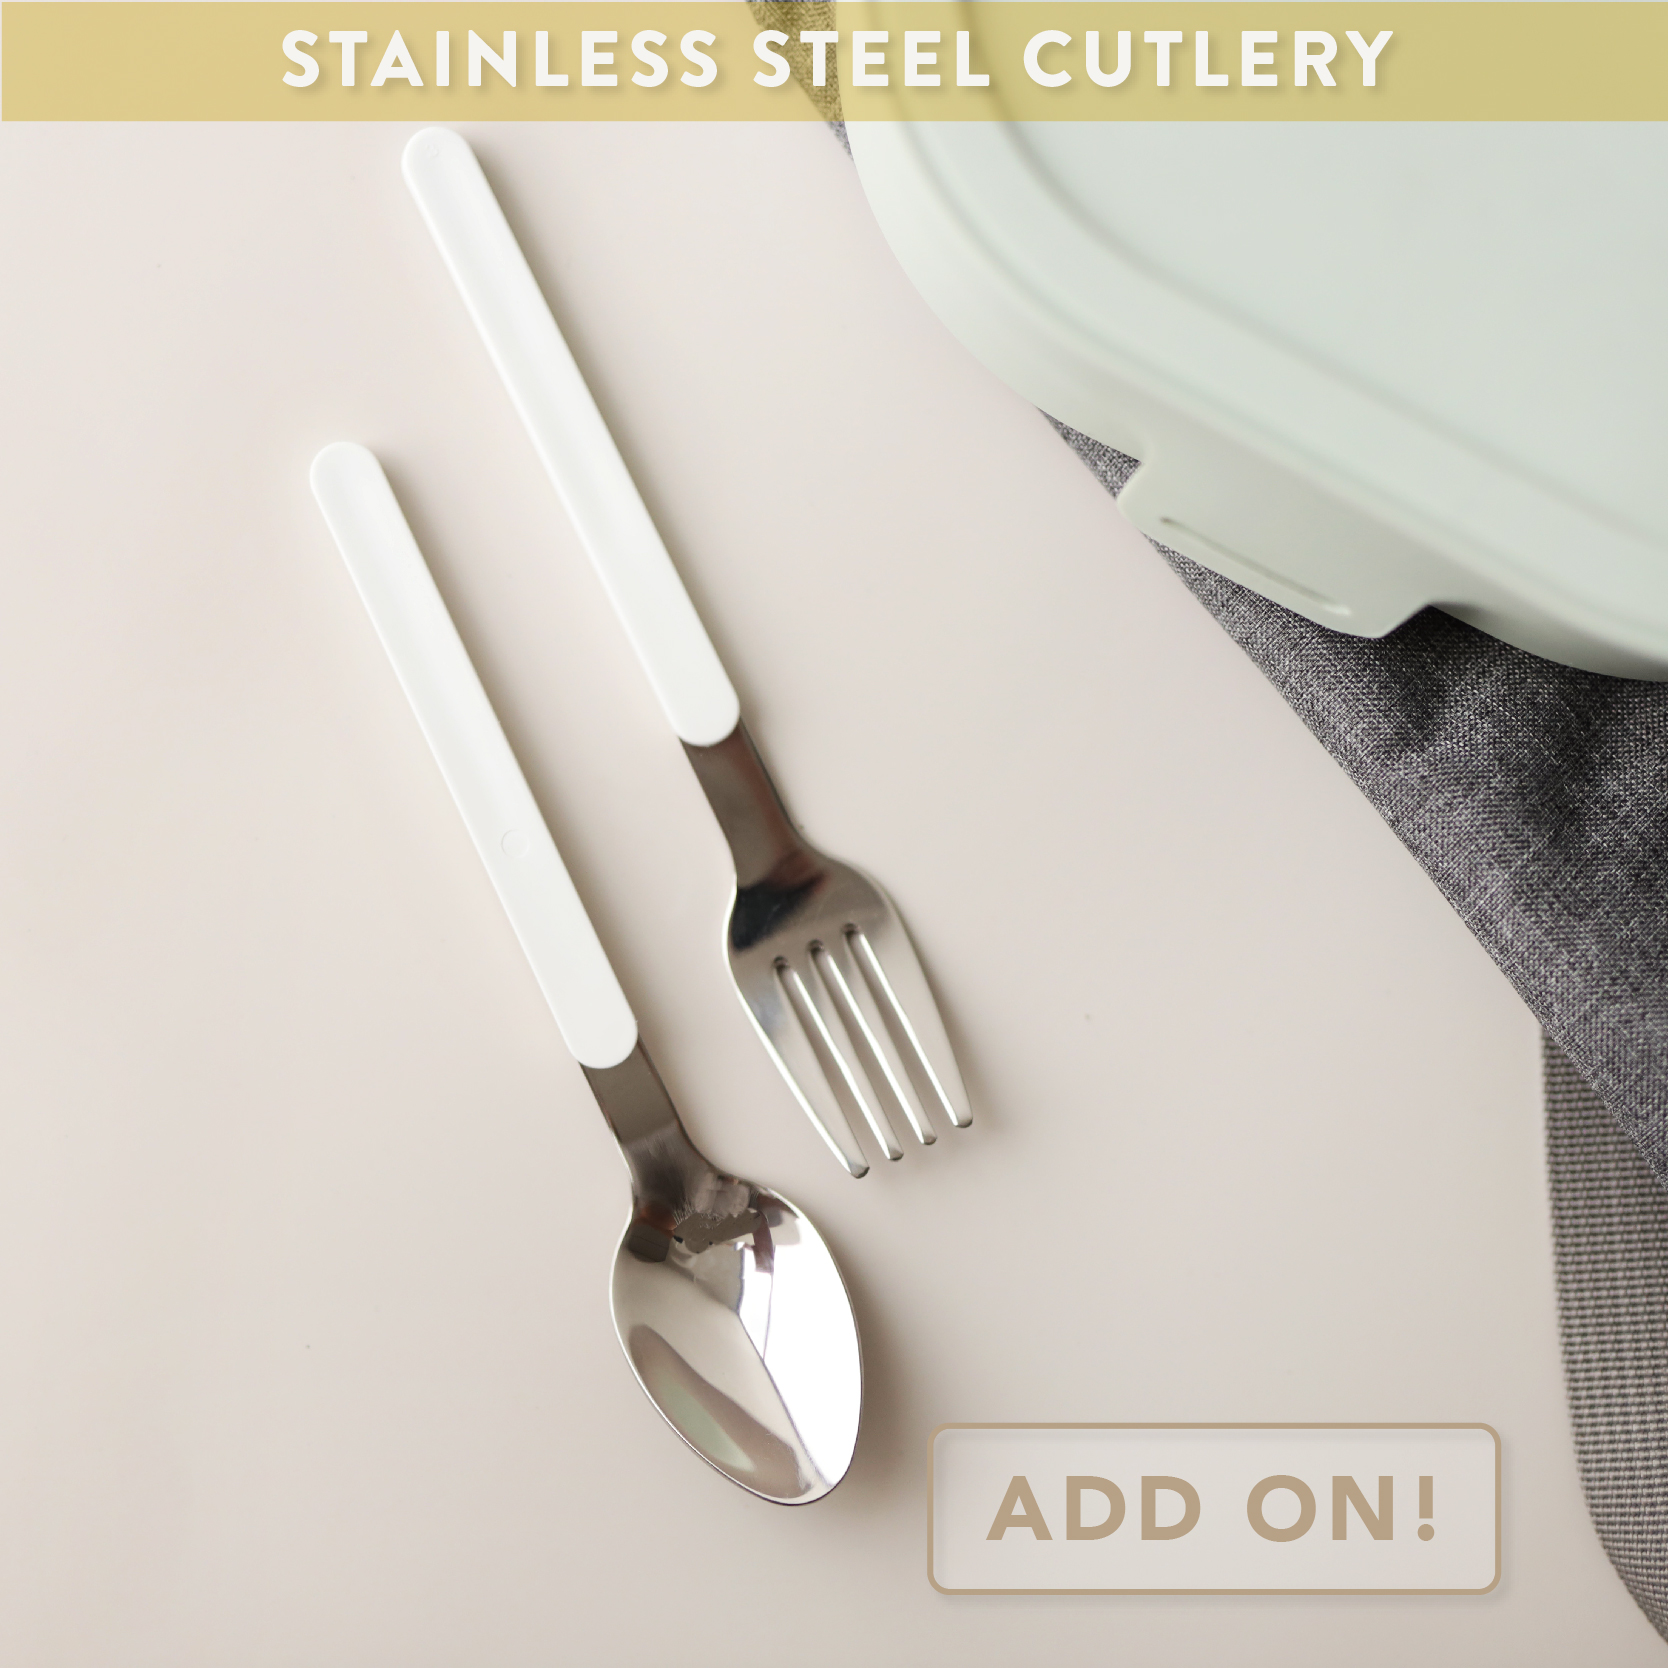 Add-on Stainless Steel Cutlery